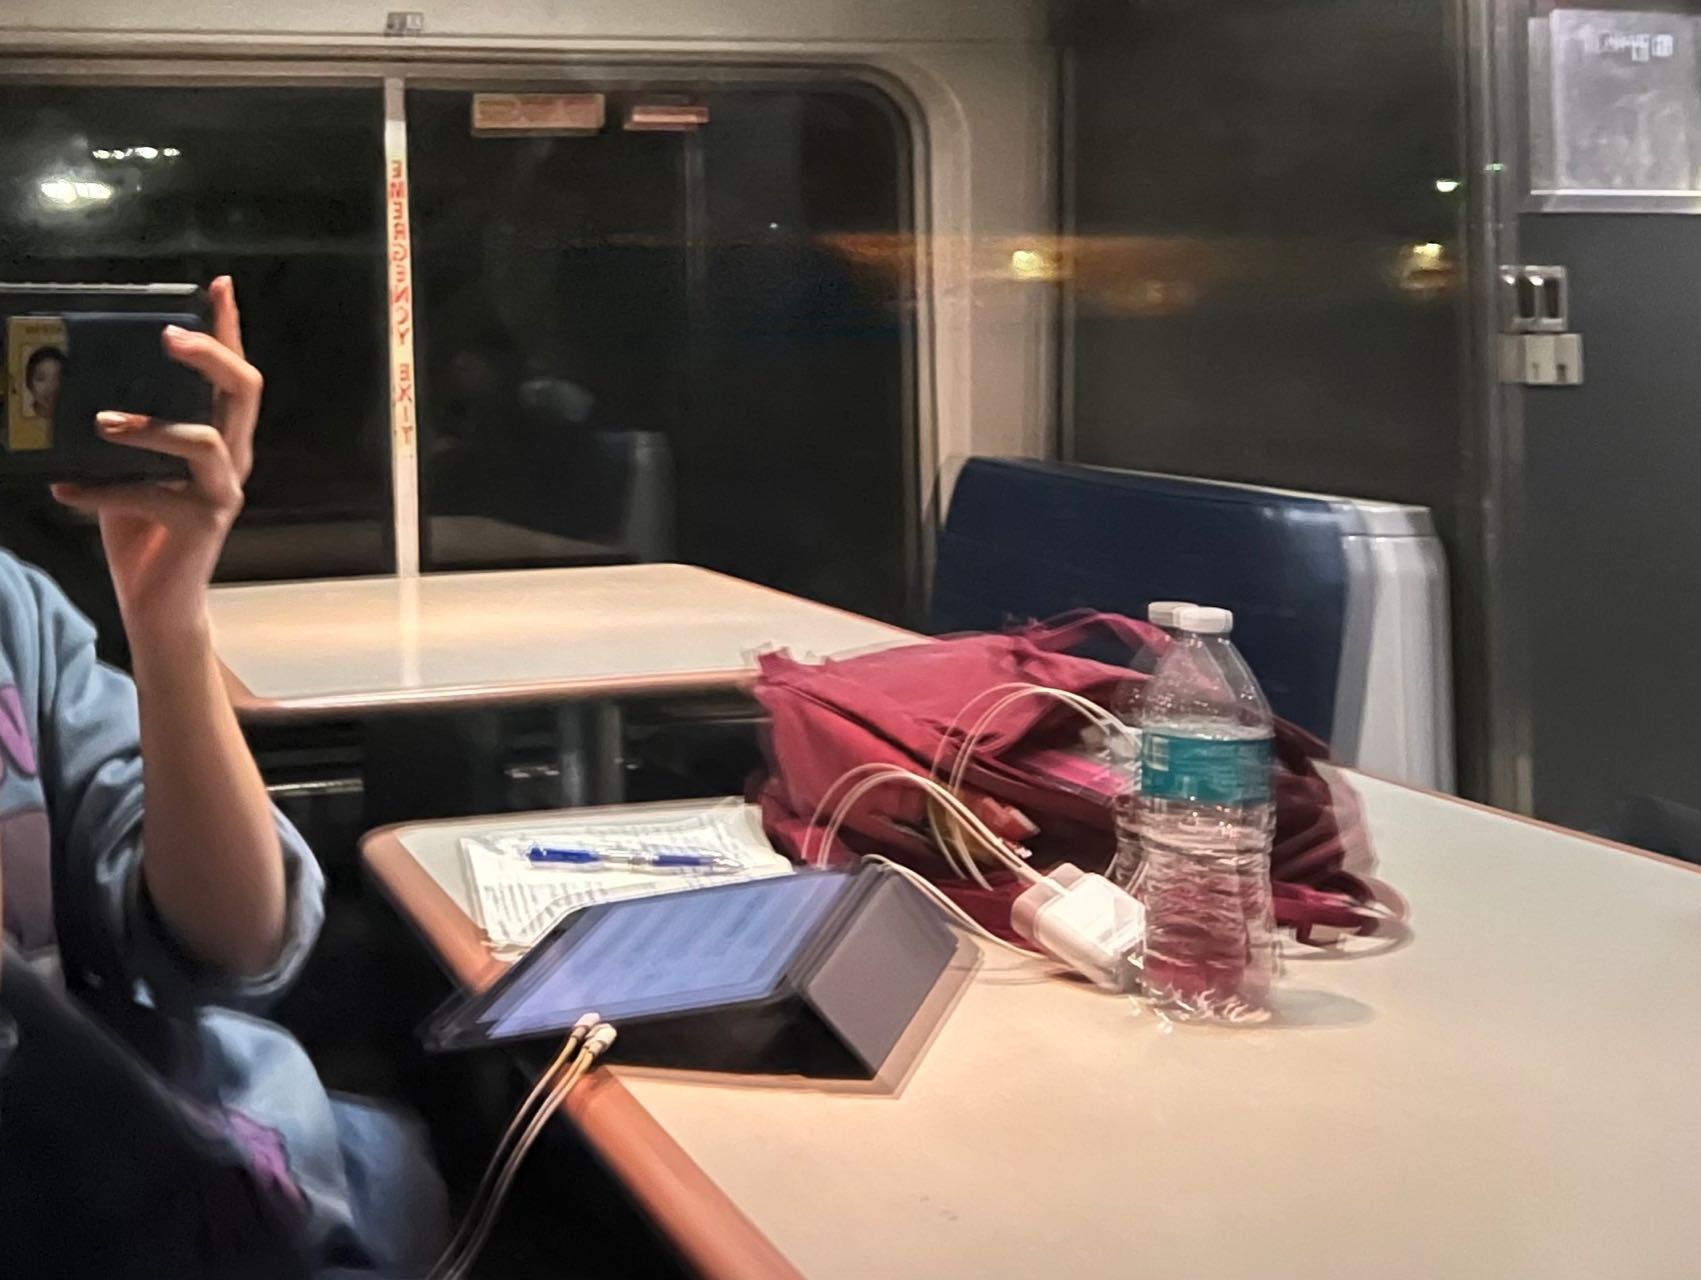 Picture of the author's reflection from a train's window, with iPad open on the desk